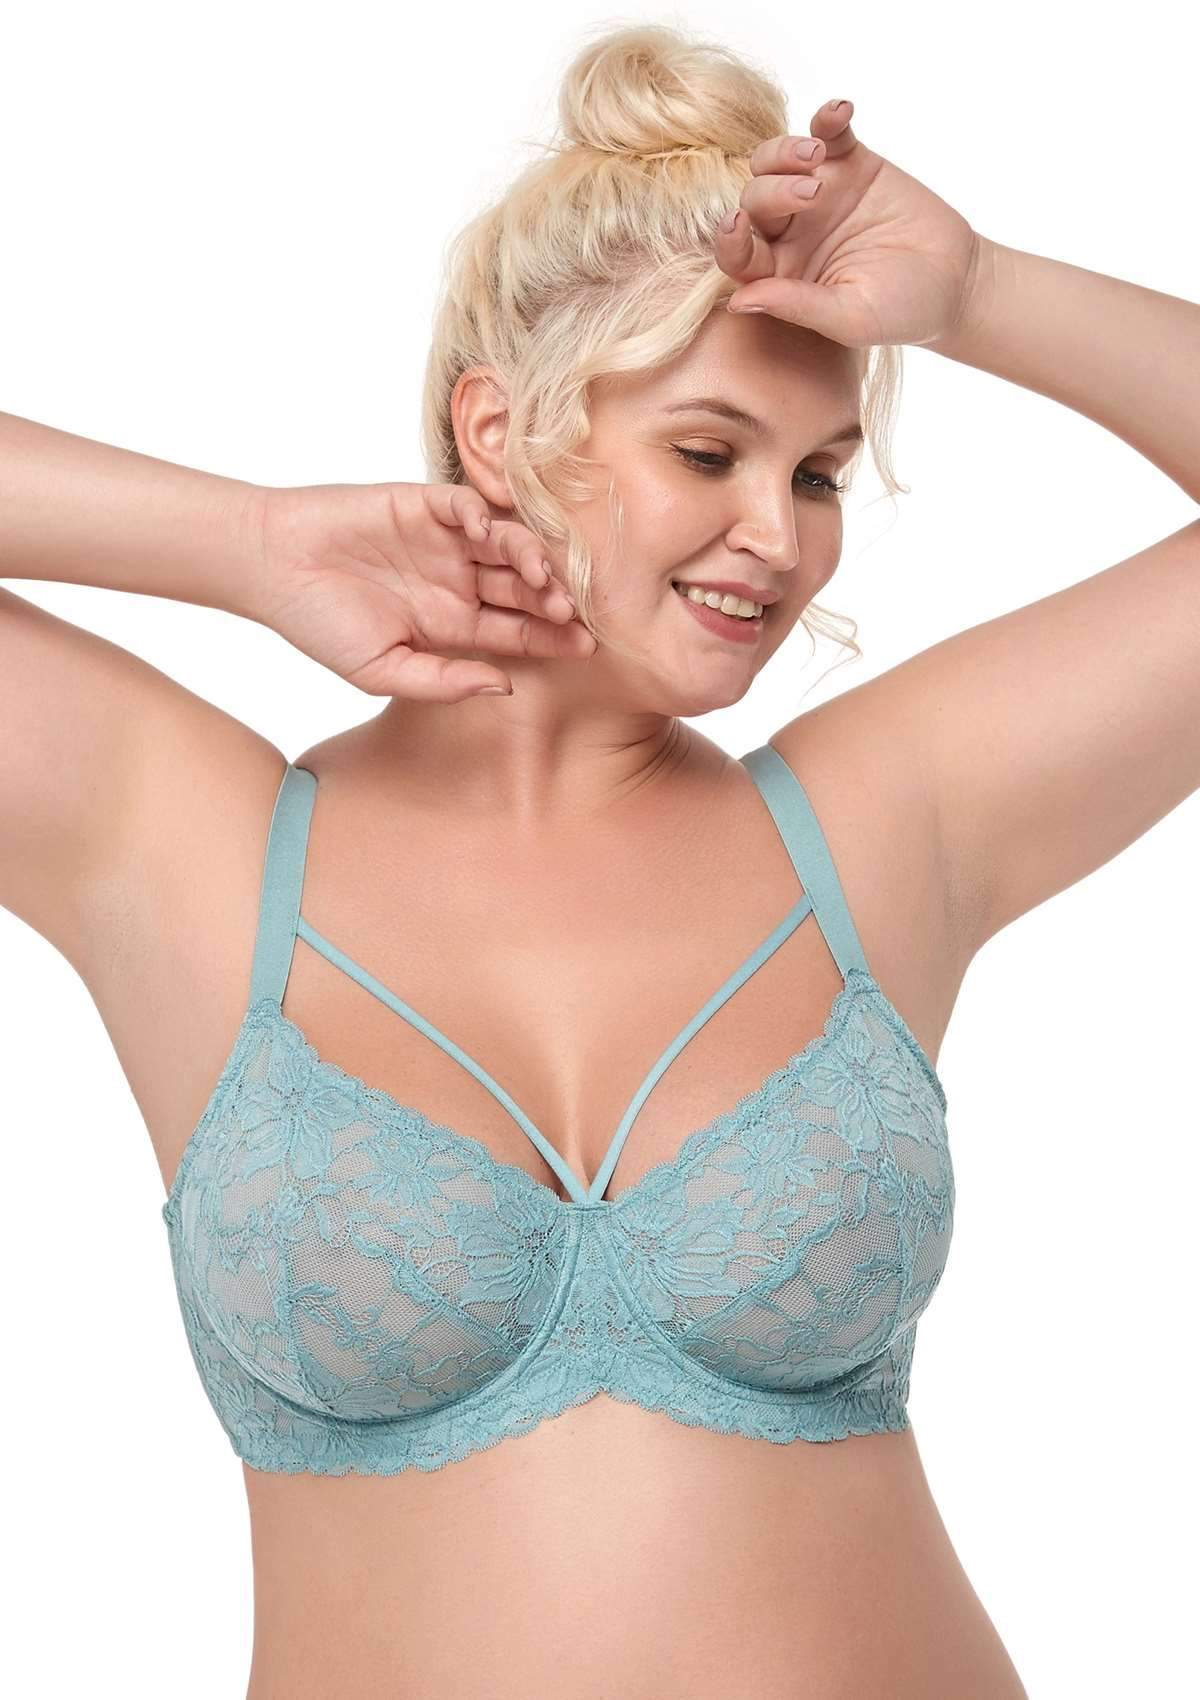 HSIA Pretty In Petals Unlined Lace Bra: Comfortable And Supportive Bra - Crystal Blue / 36 / C